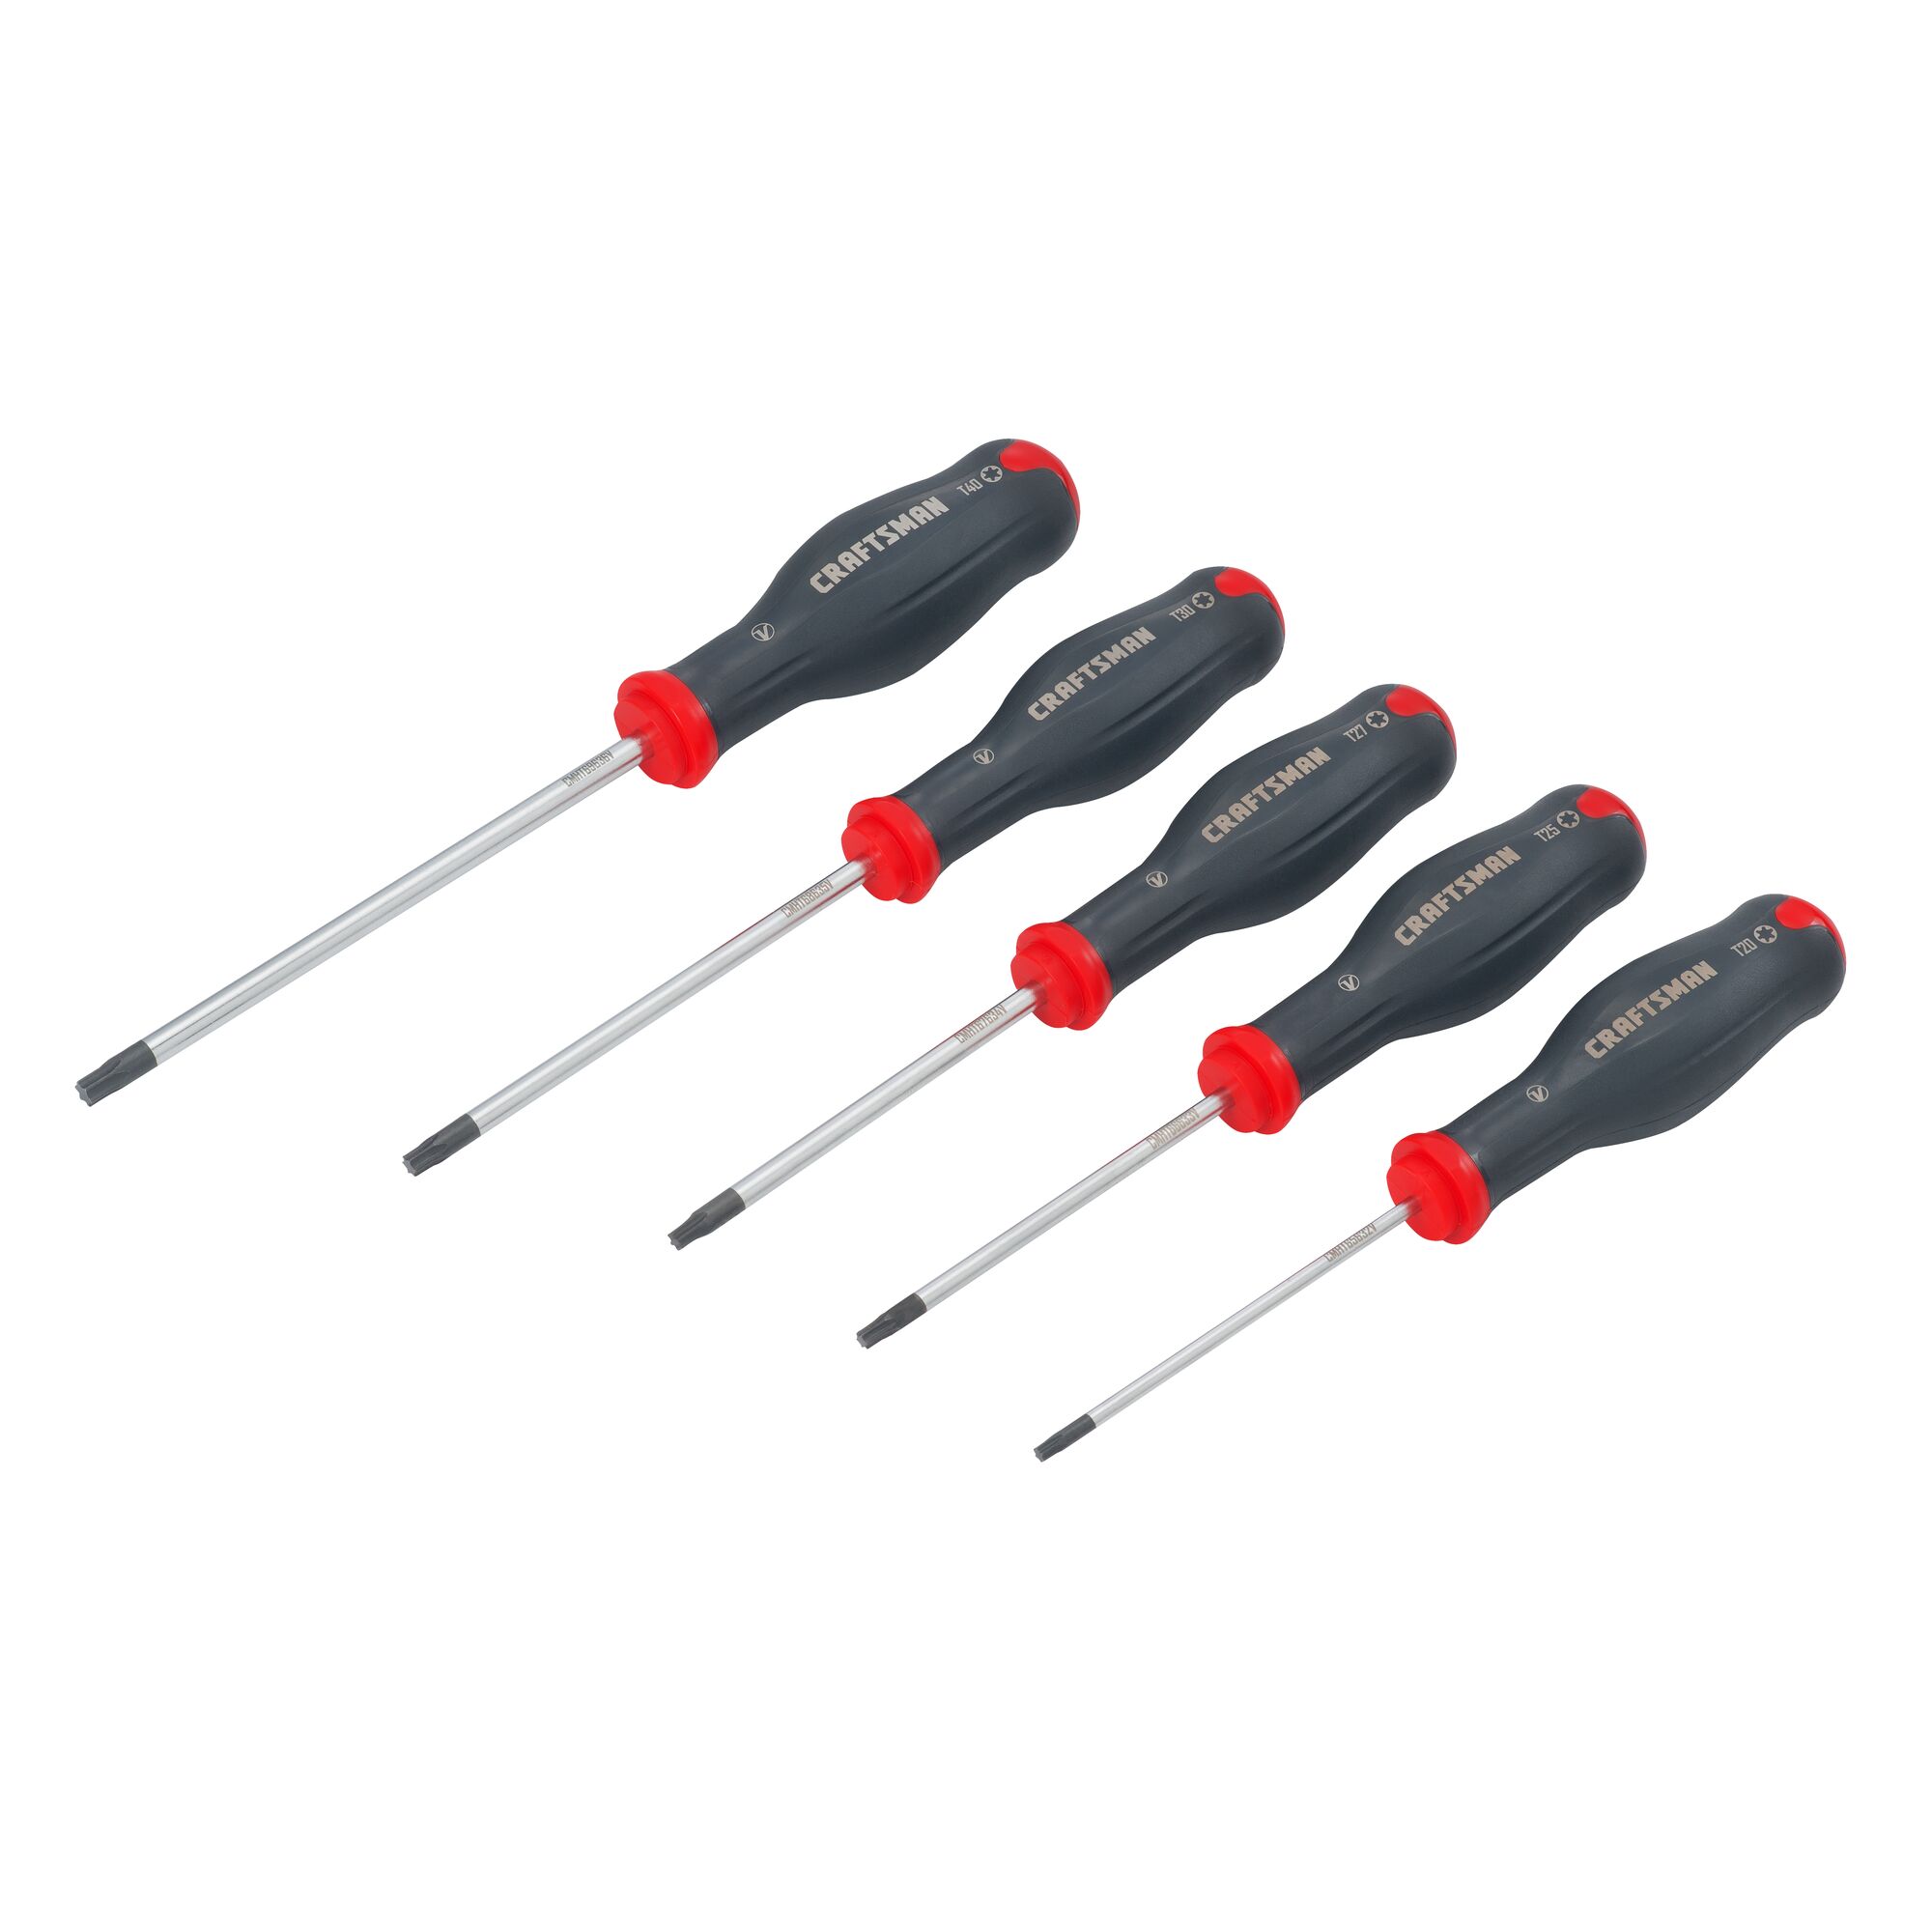 View of CRAFTSMAN Screwdrivers: Set on white background